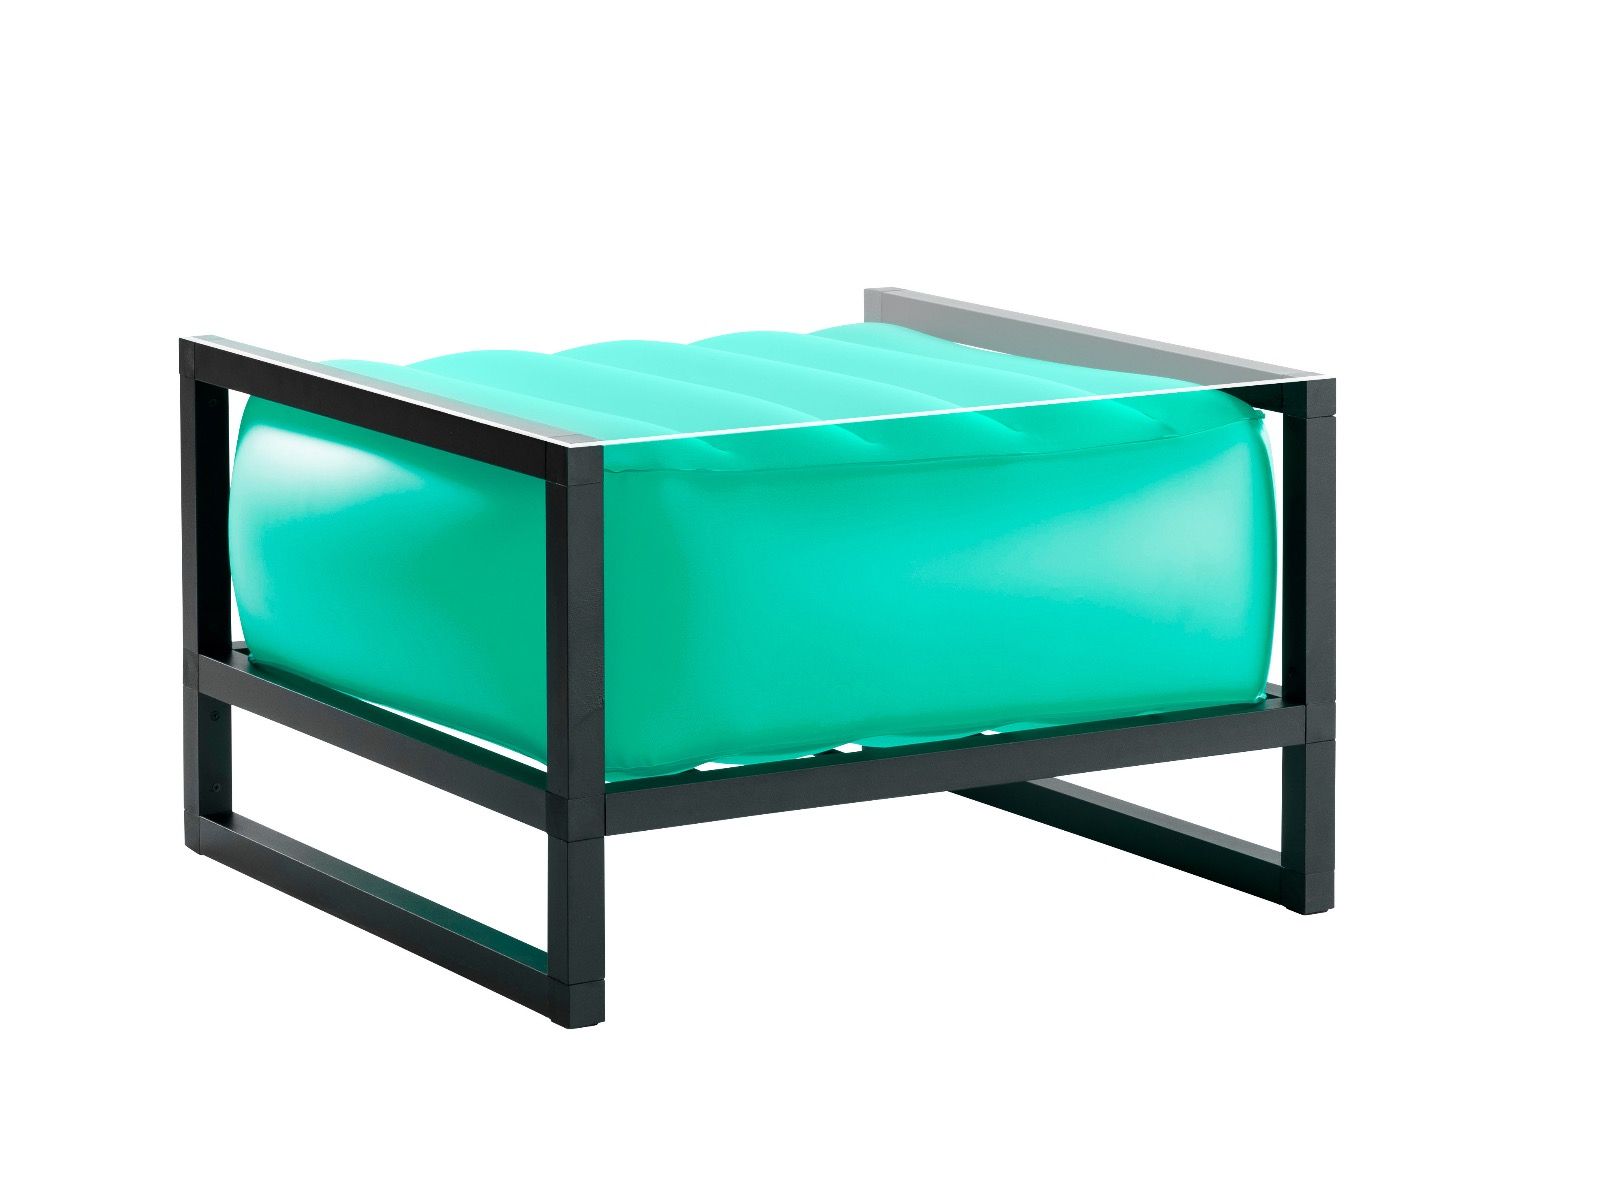 YOMI EKO TABLE WITH LIGHTING - BLACK WOODEN STRUCTURE - GREEN